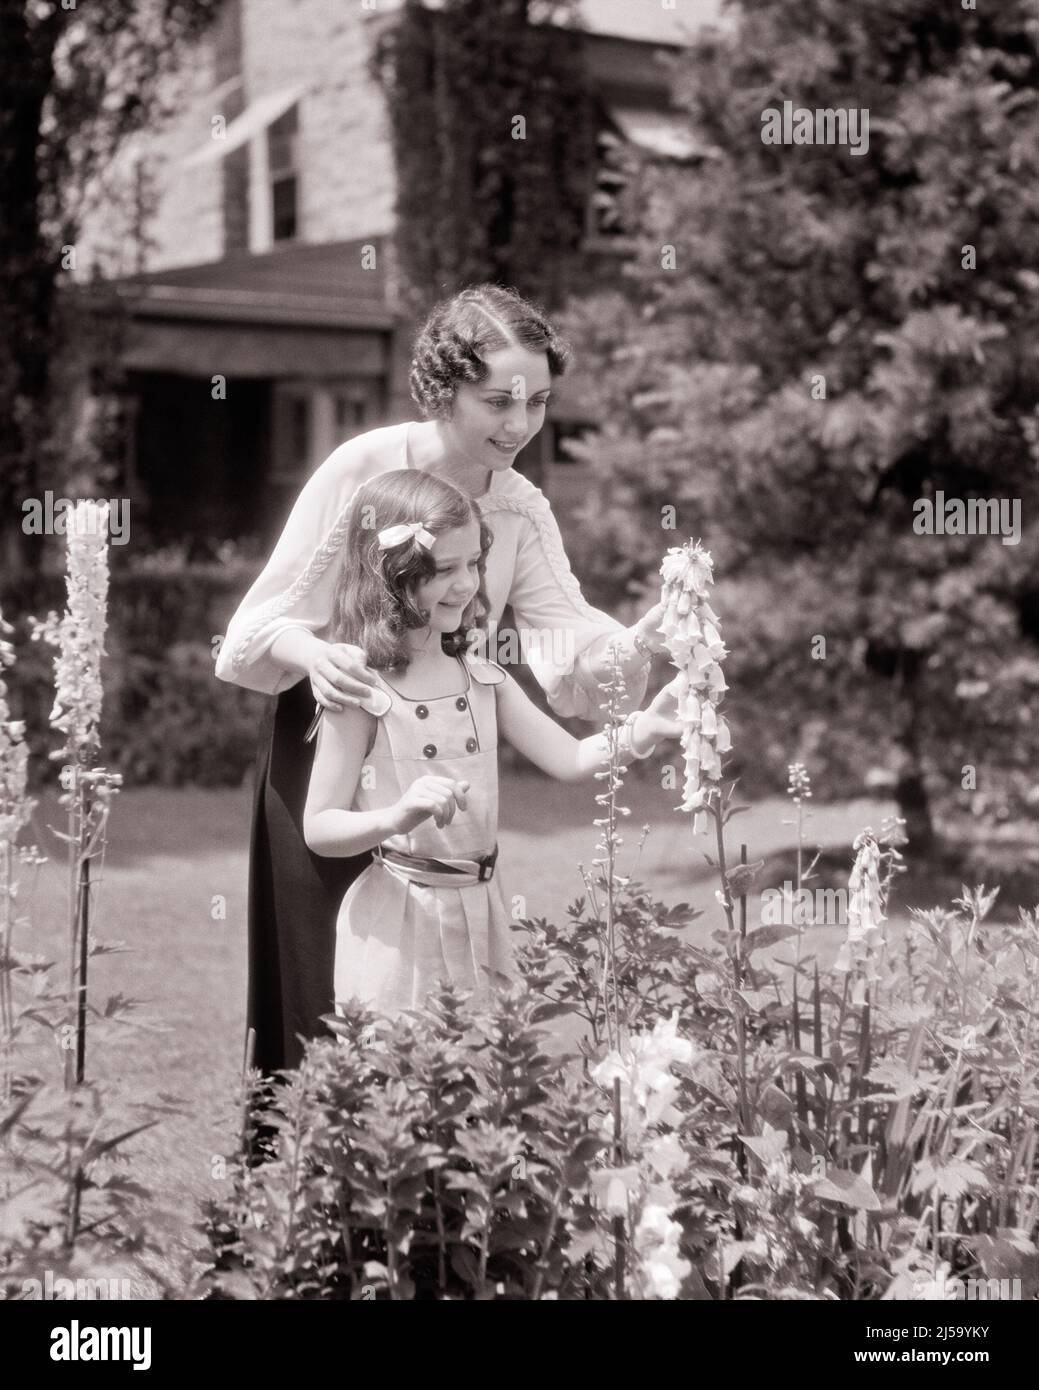 1930s SMILING WOMAN MOTHER AND GIRL DAUGHTER IN THE GARDEN EXAMINING BLOSSOMS ON DIGITALIS PURPUREA OR COMMON FOXGLOVE PLANT - j4735 HAR001 HARS NOSTALGIA OLD FASHION 1 JUVENILE STYLE STRONG PLEASED FAMILIES JOY LIFESTYLE FEMALES HOUSES HOME LIFE COPY SPACE HALF-LENGTH LADIES DAUGHTERS PERSONS RESIDENTIAL CARING BUILDINGS PLANTS B&W SUMMERTIME GARDENER CHEERFUL AND COMMON EXAMINING HOMES SMILES GARDENS JOYFUL RESIDENCE OR PERSONAL ATTACHMENT AFFECTION BLOSSOMS EMOTION FOXGLOVE JUVENILES MID-ADULT MID-ADULT WOMAN MOMS PRE-TEEN PRE-TEEN GIRL SEASON BLACK AND WHITE CAUCASIAN ETHNICITY HAR001 Stock Photo